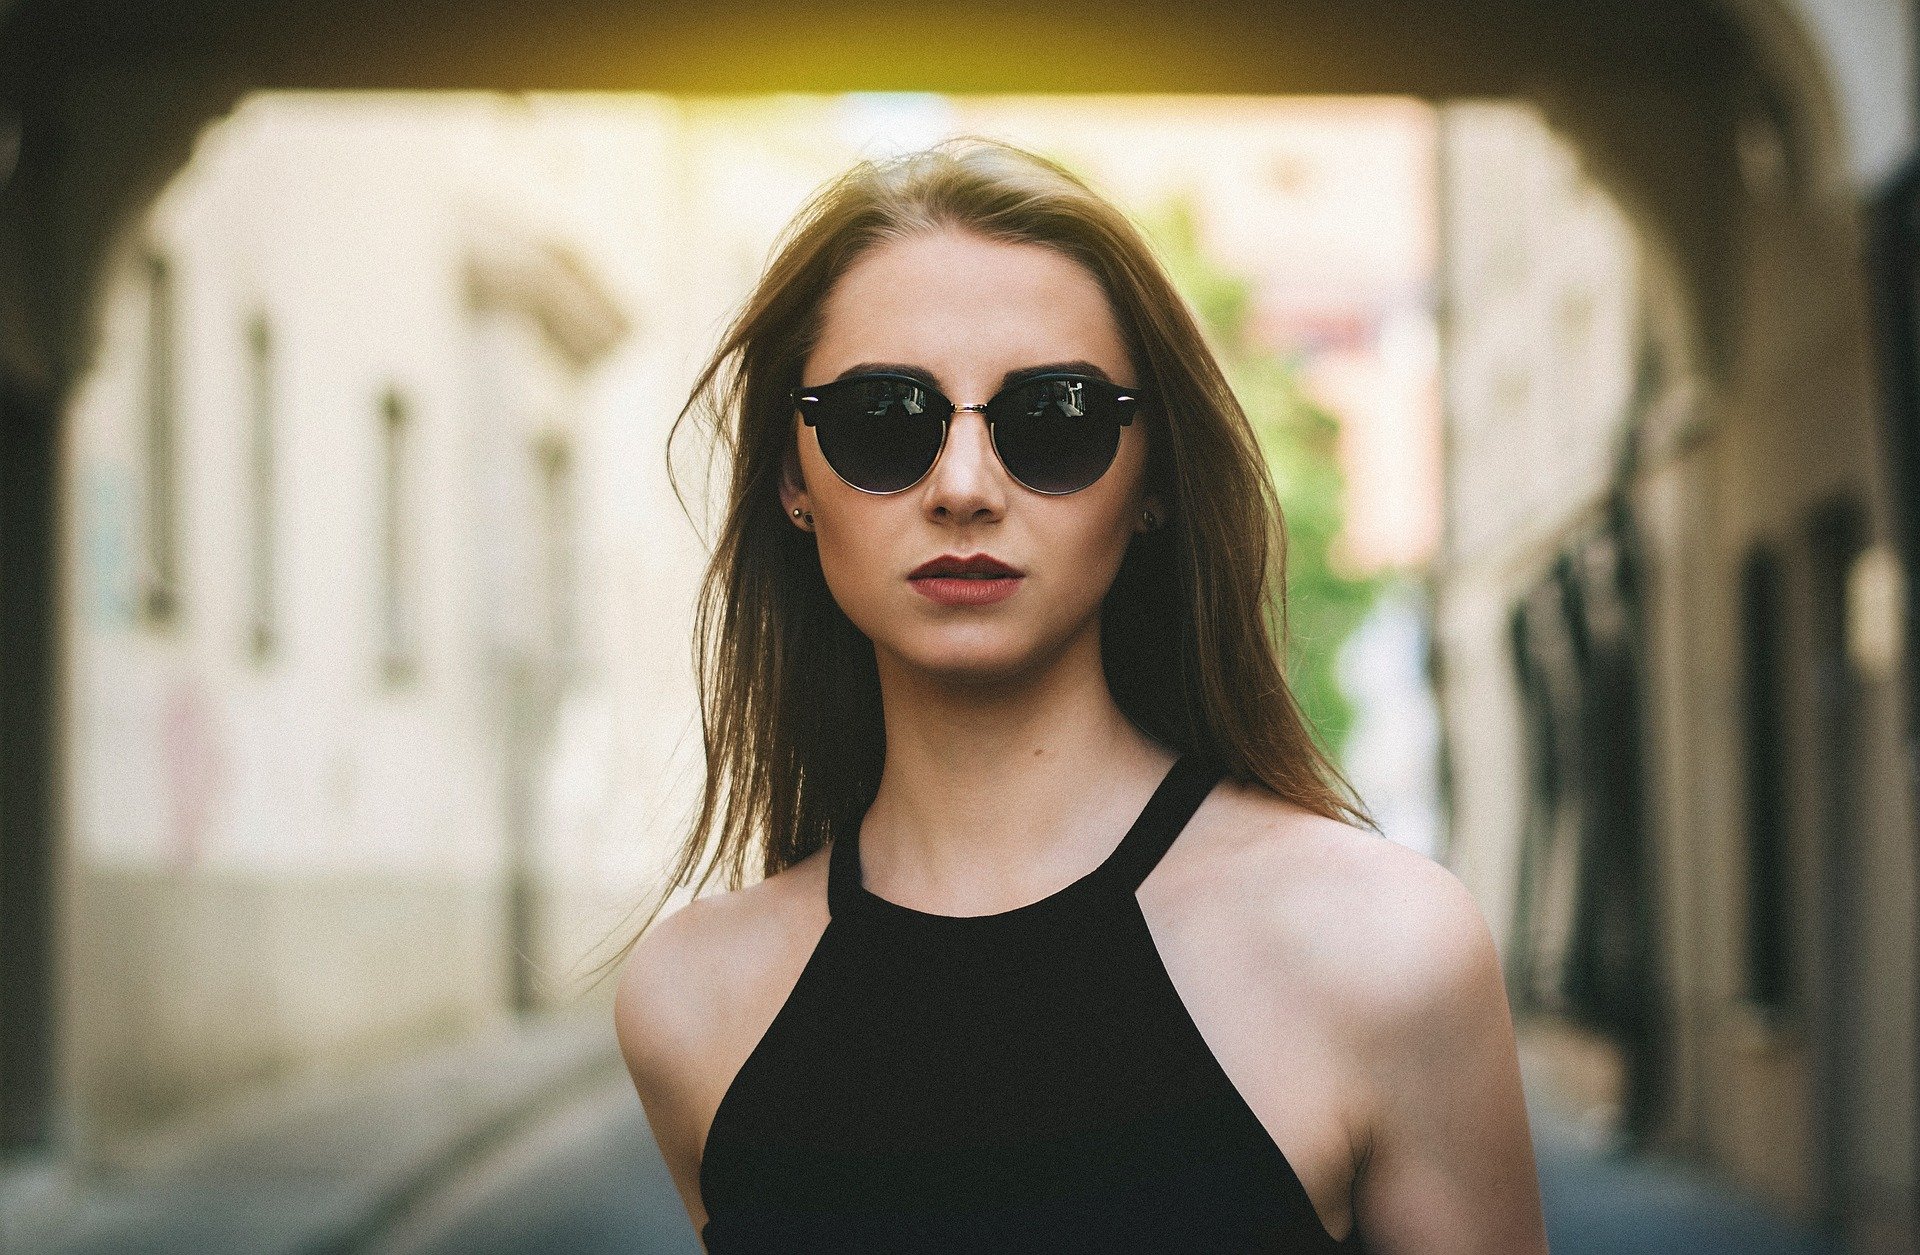 Advantages And Disadvantages Of Wearing Sunglasses